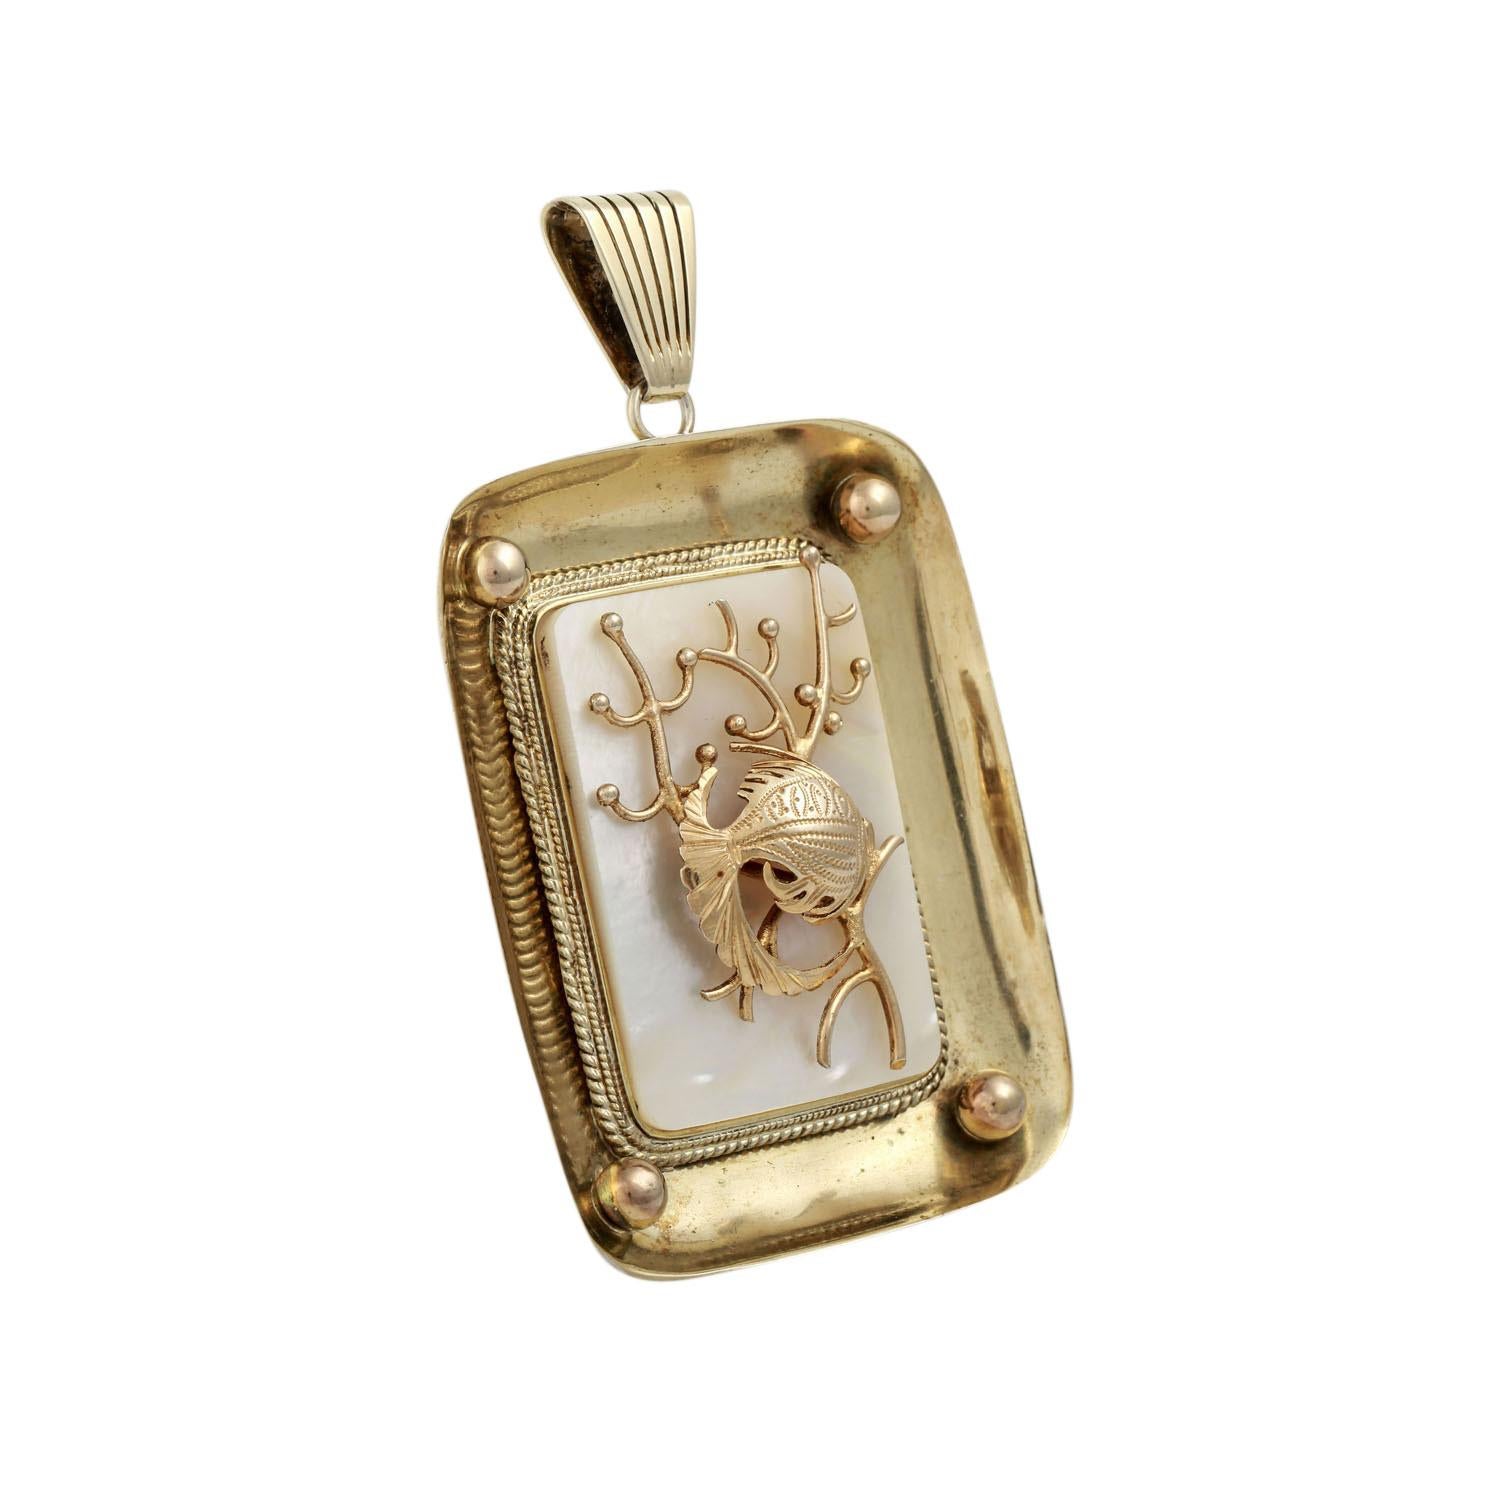 Pendant with mother-of-pearl plate and fish motif, gold-plated silver, L: approx. 7.7 cm, mid-20th century, slight signs of wear.



Pendant with mother-of-pearl table and fish theme , silver gilded, L: approx. 7.7 cm, mid-20th century, slight signs